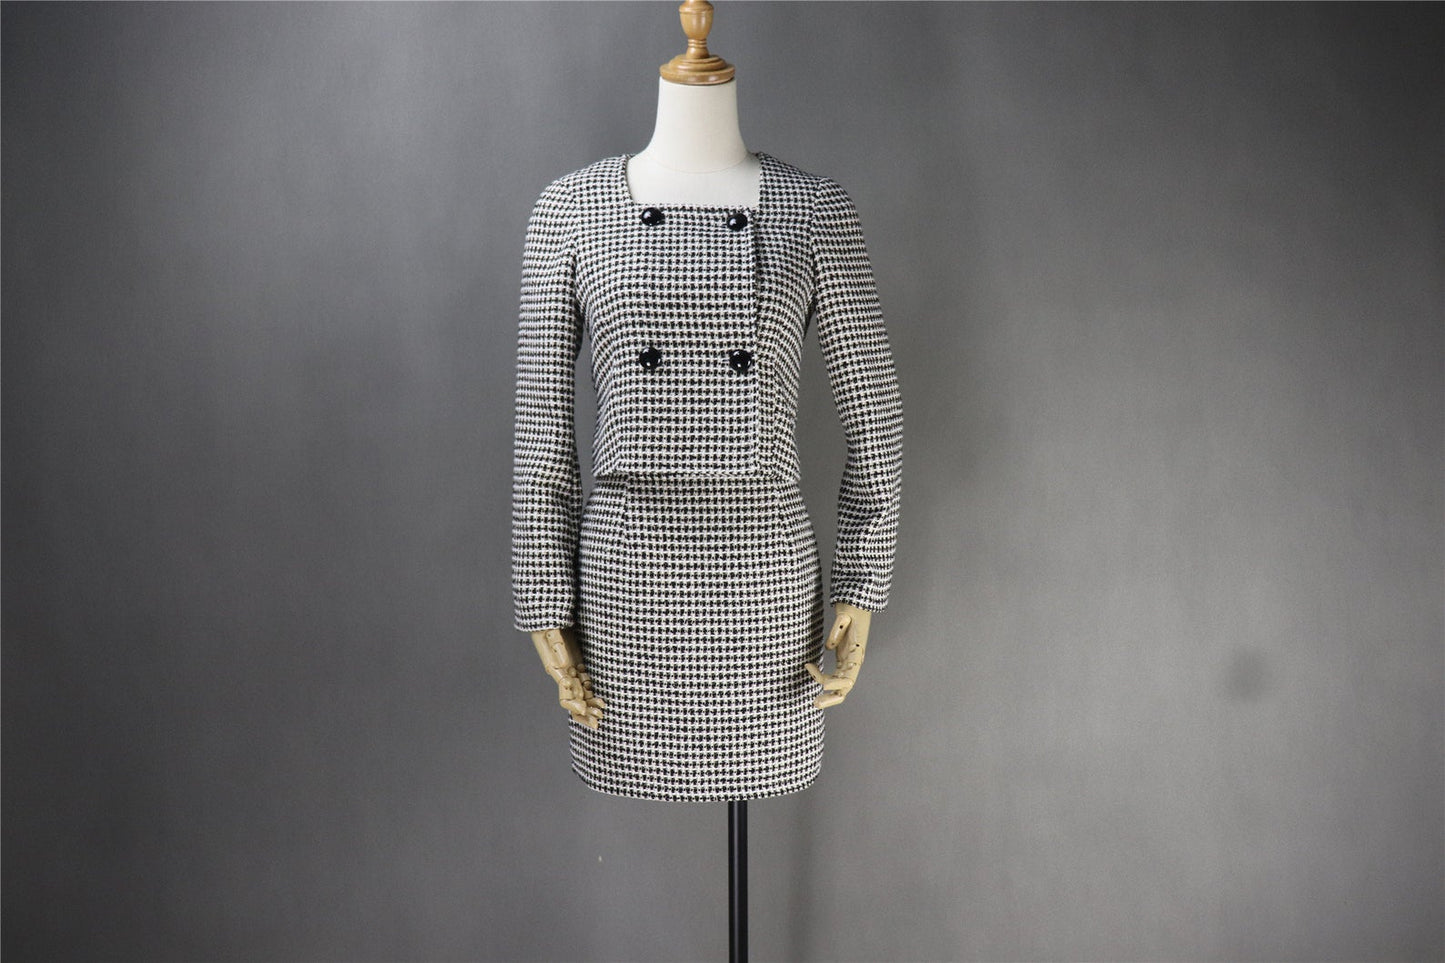 Tailor Made Tweed Squire Neck Small Check Blazer + Skirt Suit for Women  UK CUSTOMER SERVICE! Tailor Made Tweed Squire Neck Small Check Blazer + Skirt Suit for Women, can worn for ceremony, college Inauguration and Official Use.  All items are made to order. Please advise your height, weight and body measurements ( Bust, shoulder, Sleeves, Waist and Length etc). Our tailors will make the order for you!  Materials: polyester